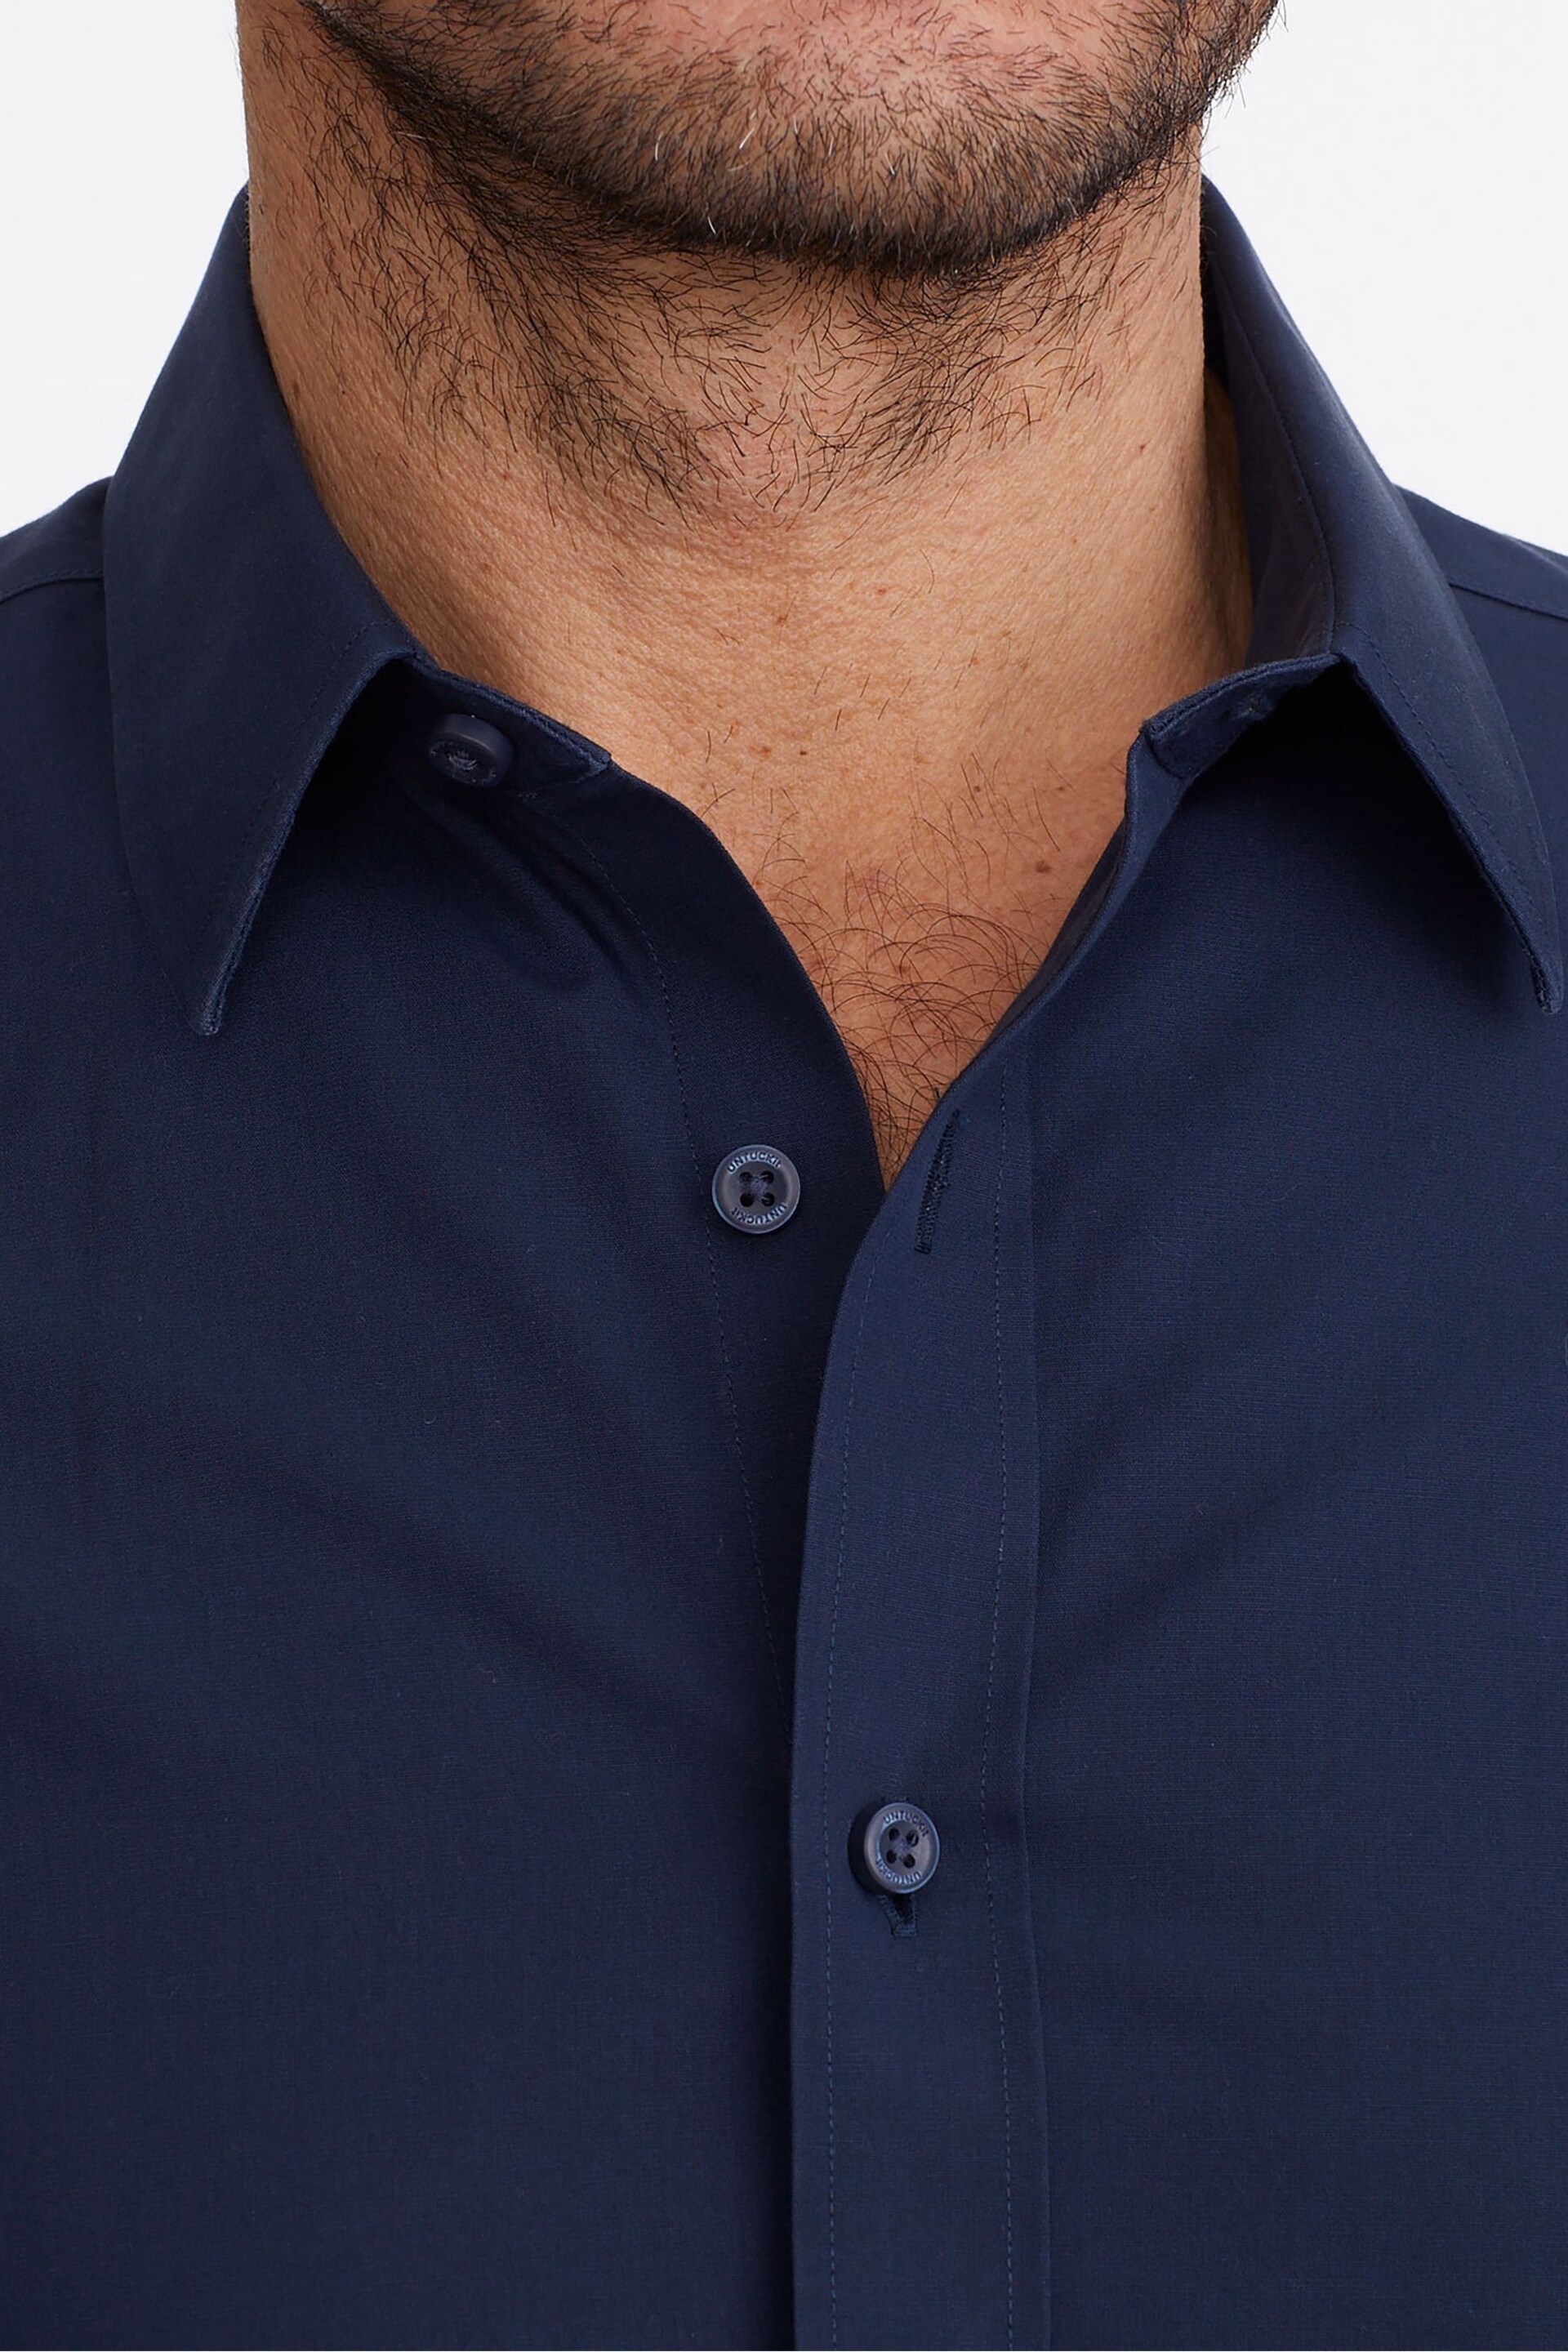 UNTUCKit Blue Dark Wrinkle-Free Relaxed Fit Castello Shirt - Image 3 of 6